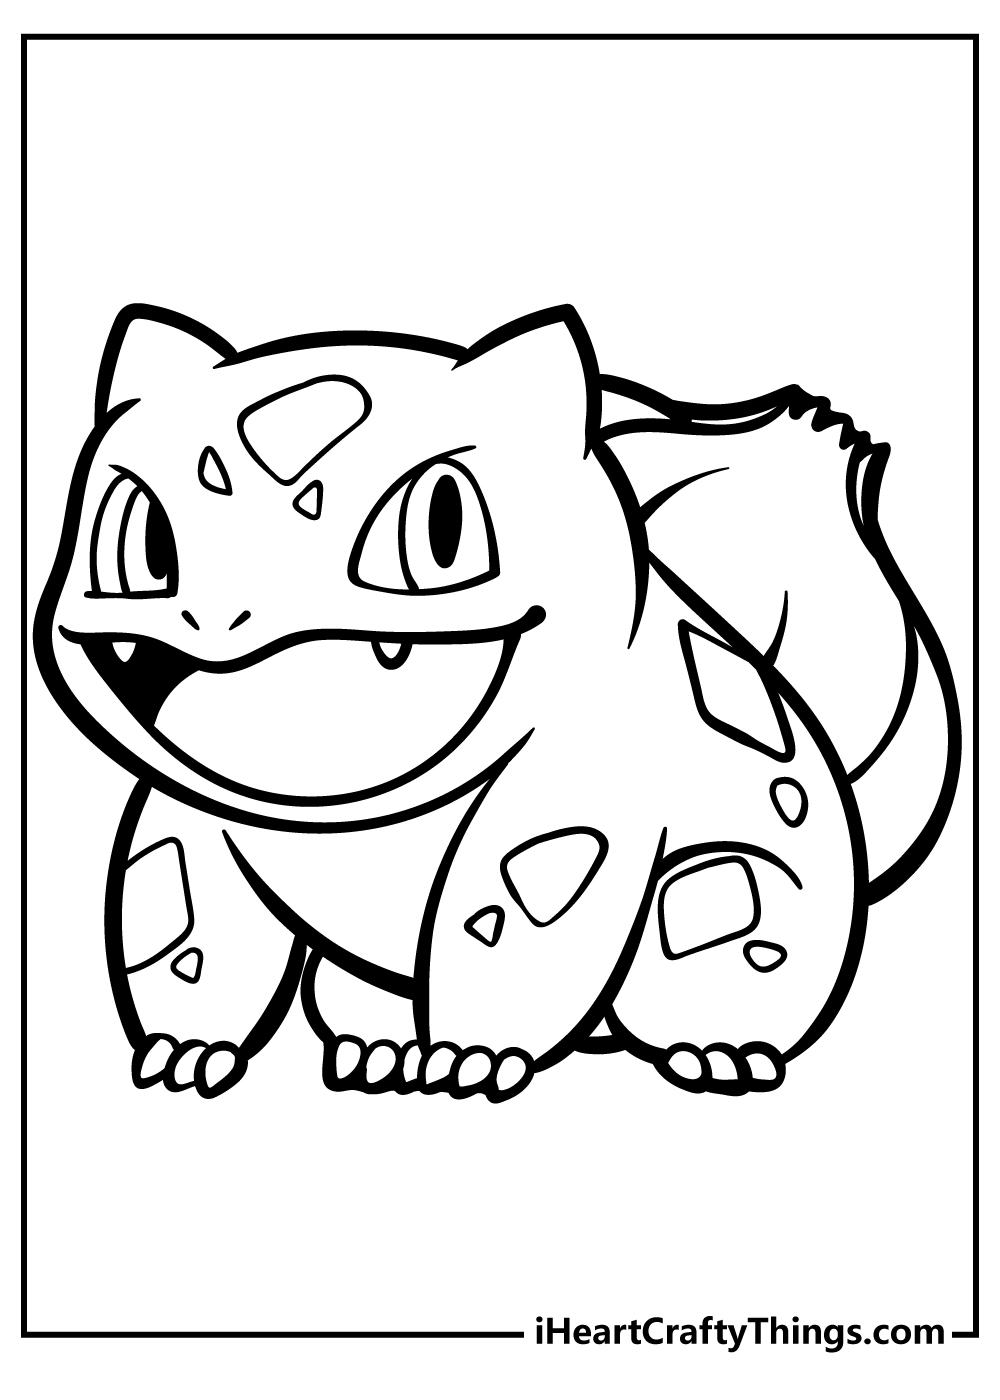 Pokemon Coloring Pages for adults free printable